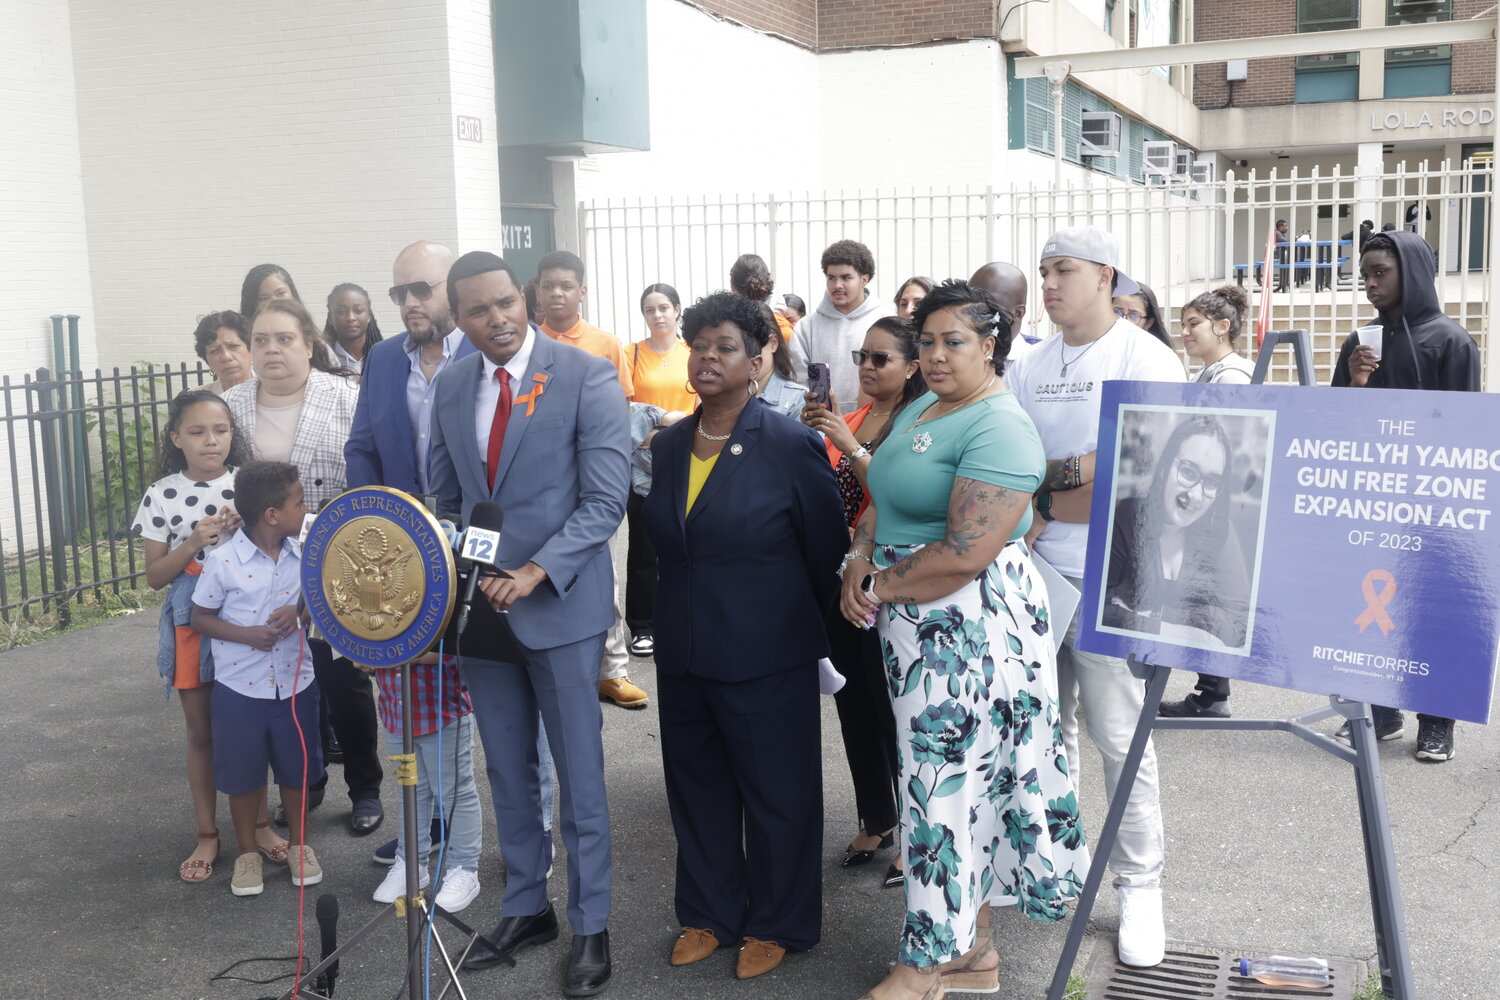 U.S. Rep. Ritchie Torres has filed the Angellyh Yambo Gun Free Zone Expansion Act of 2023, making the announcement in front of the school where the teen was gunned down. The bill is intended to ban ghost guns, while also expanding gun-free zones.